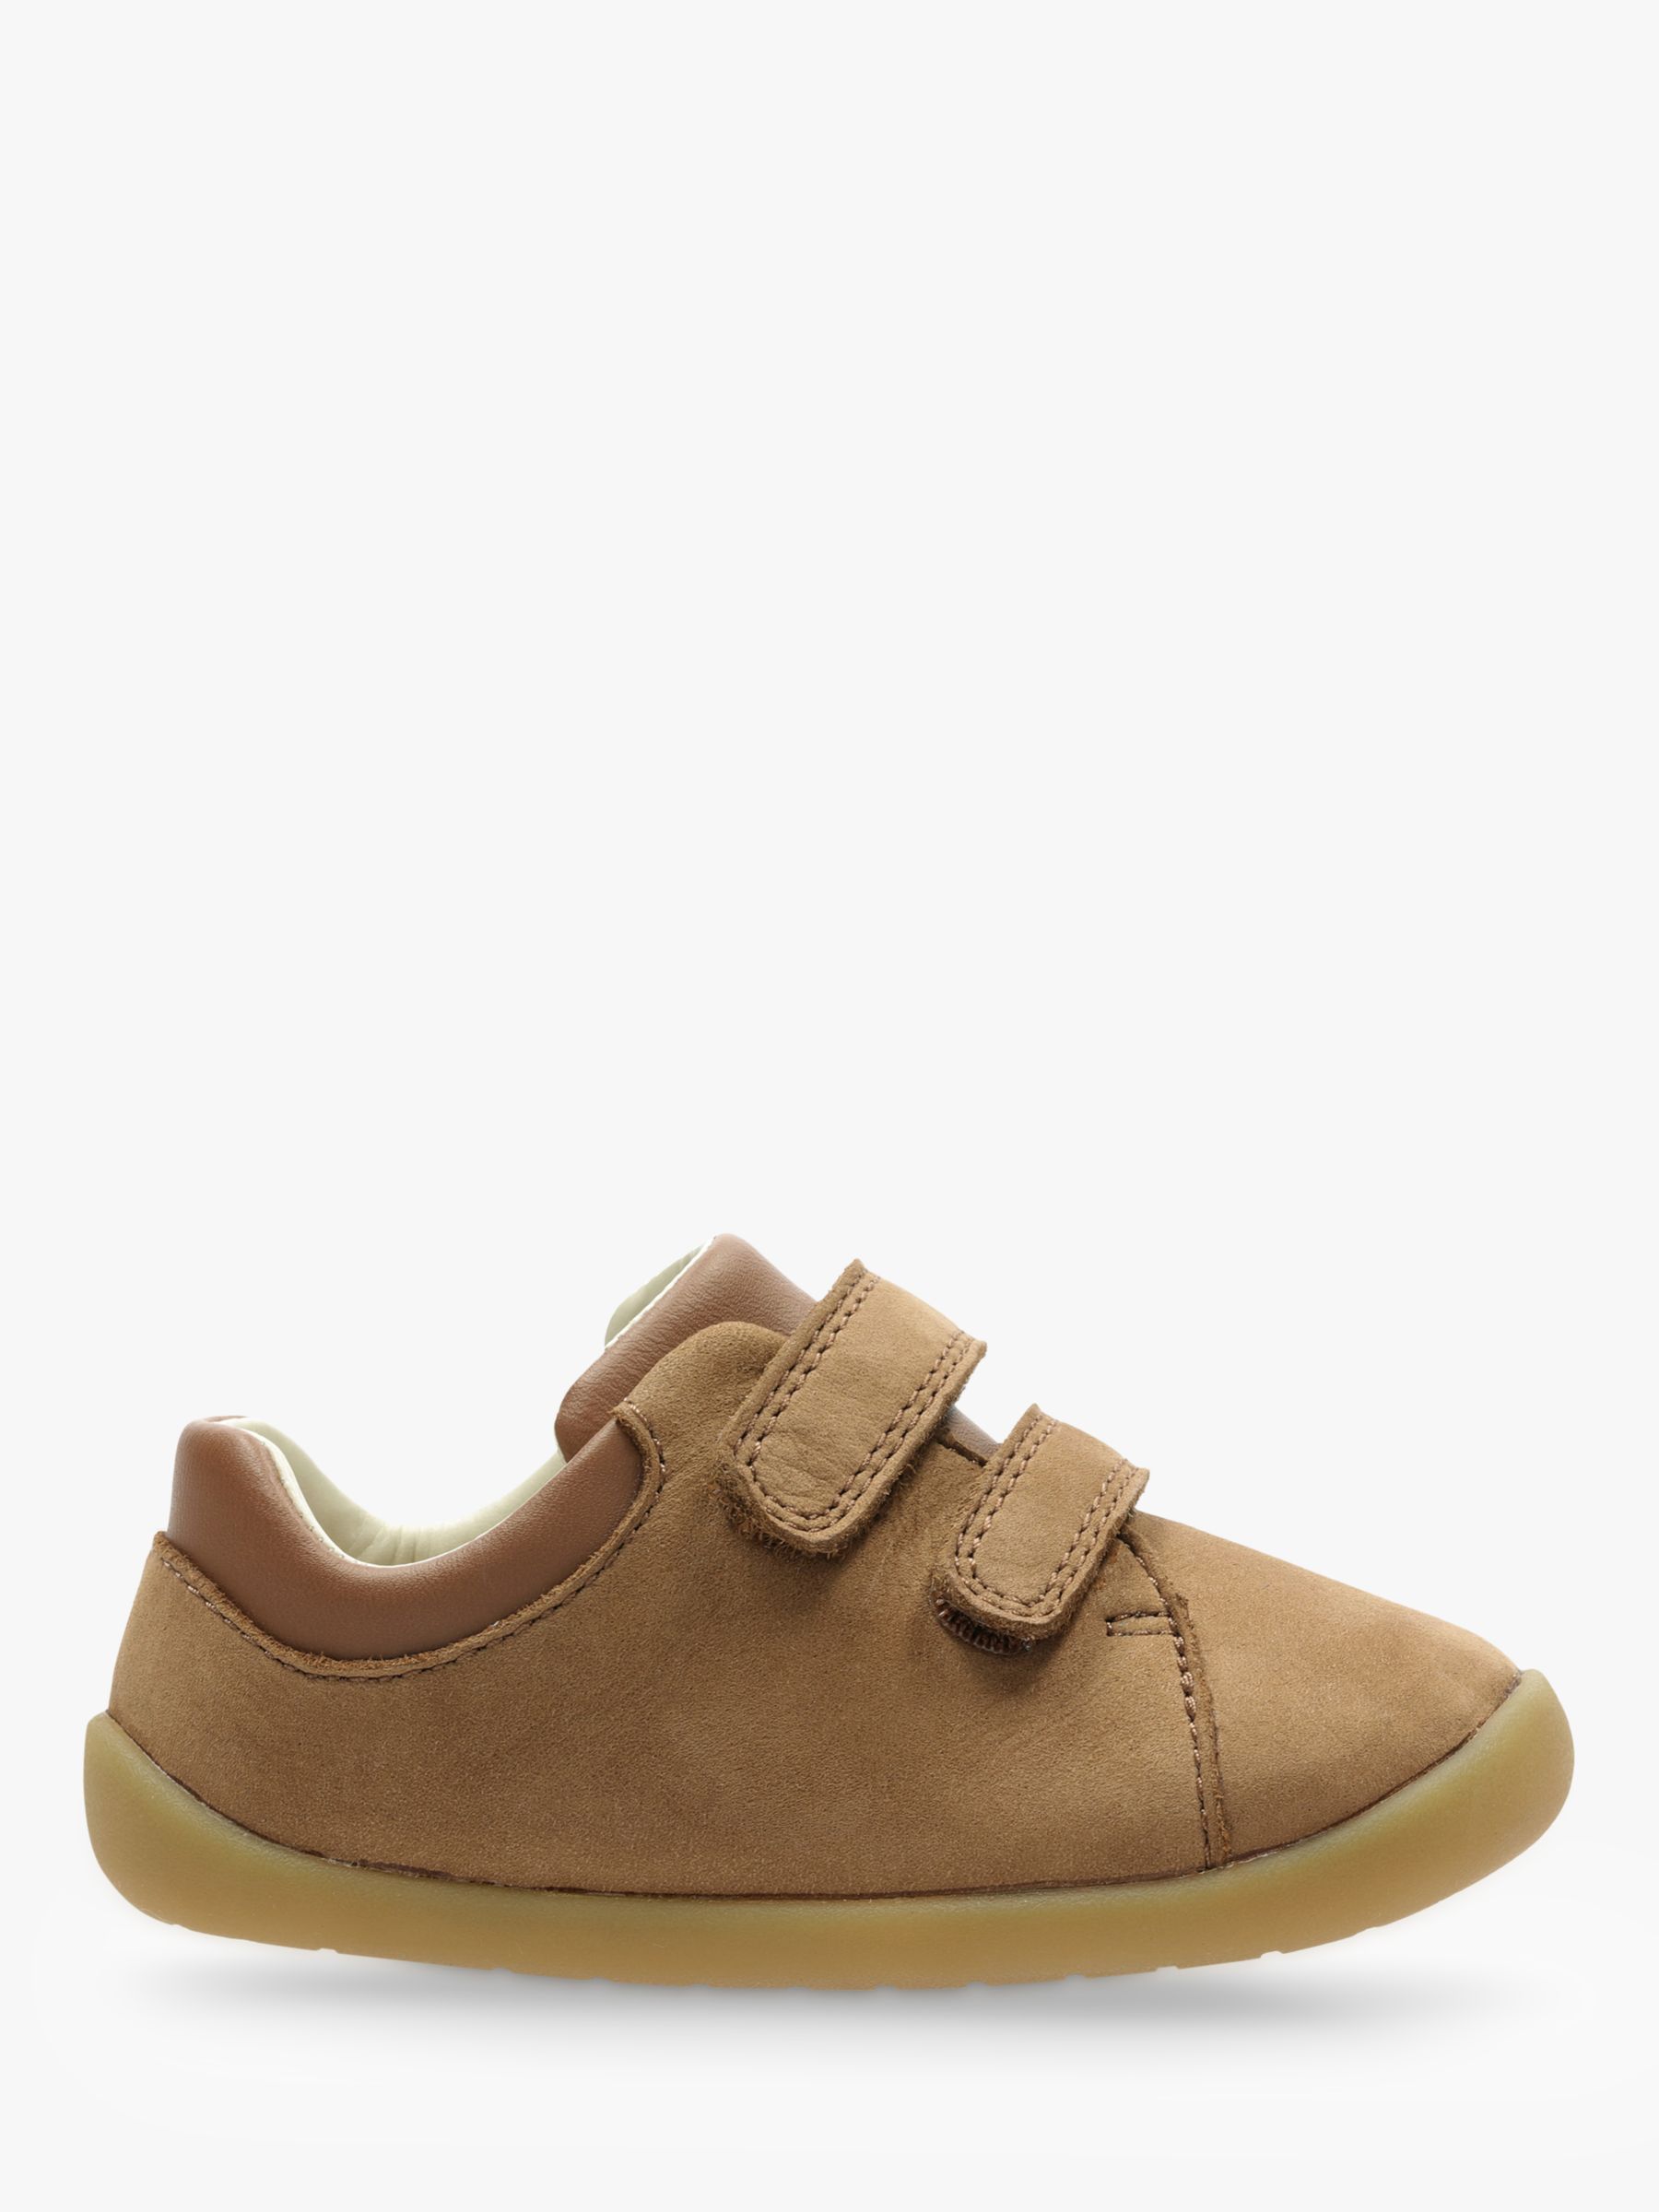 clarks shoes for 1 year old